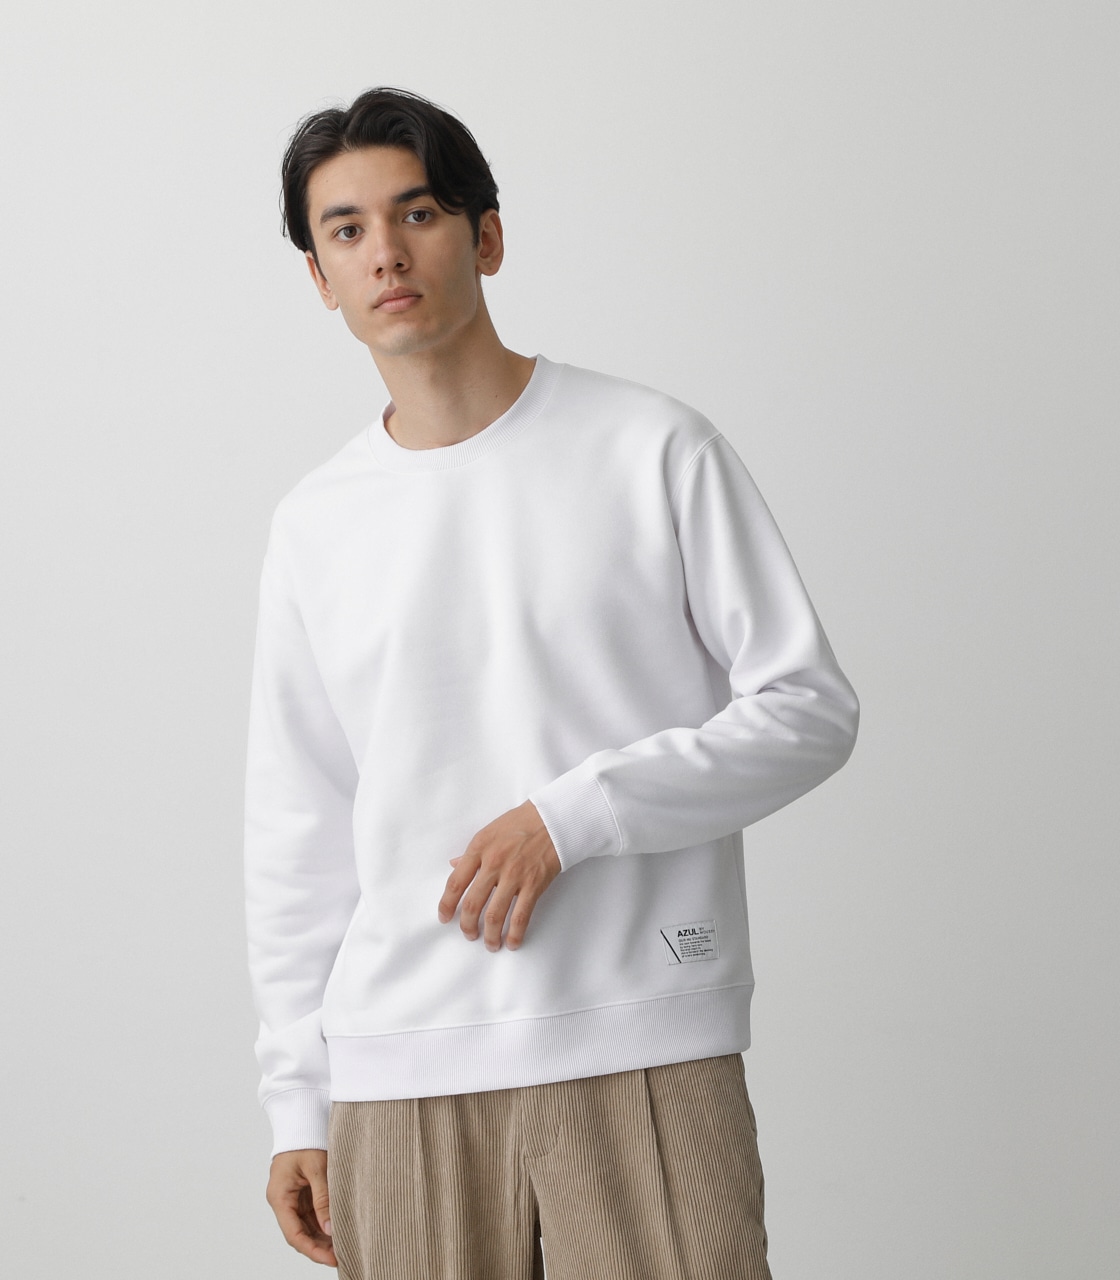 BRUSHED BACK COLOR TOPS/ブラッシュドバックカラートップス 詳細画像 WHT 1